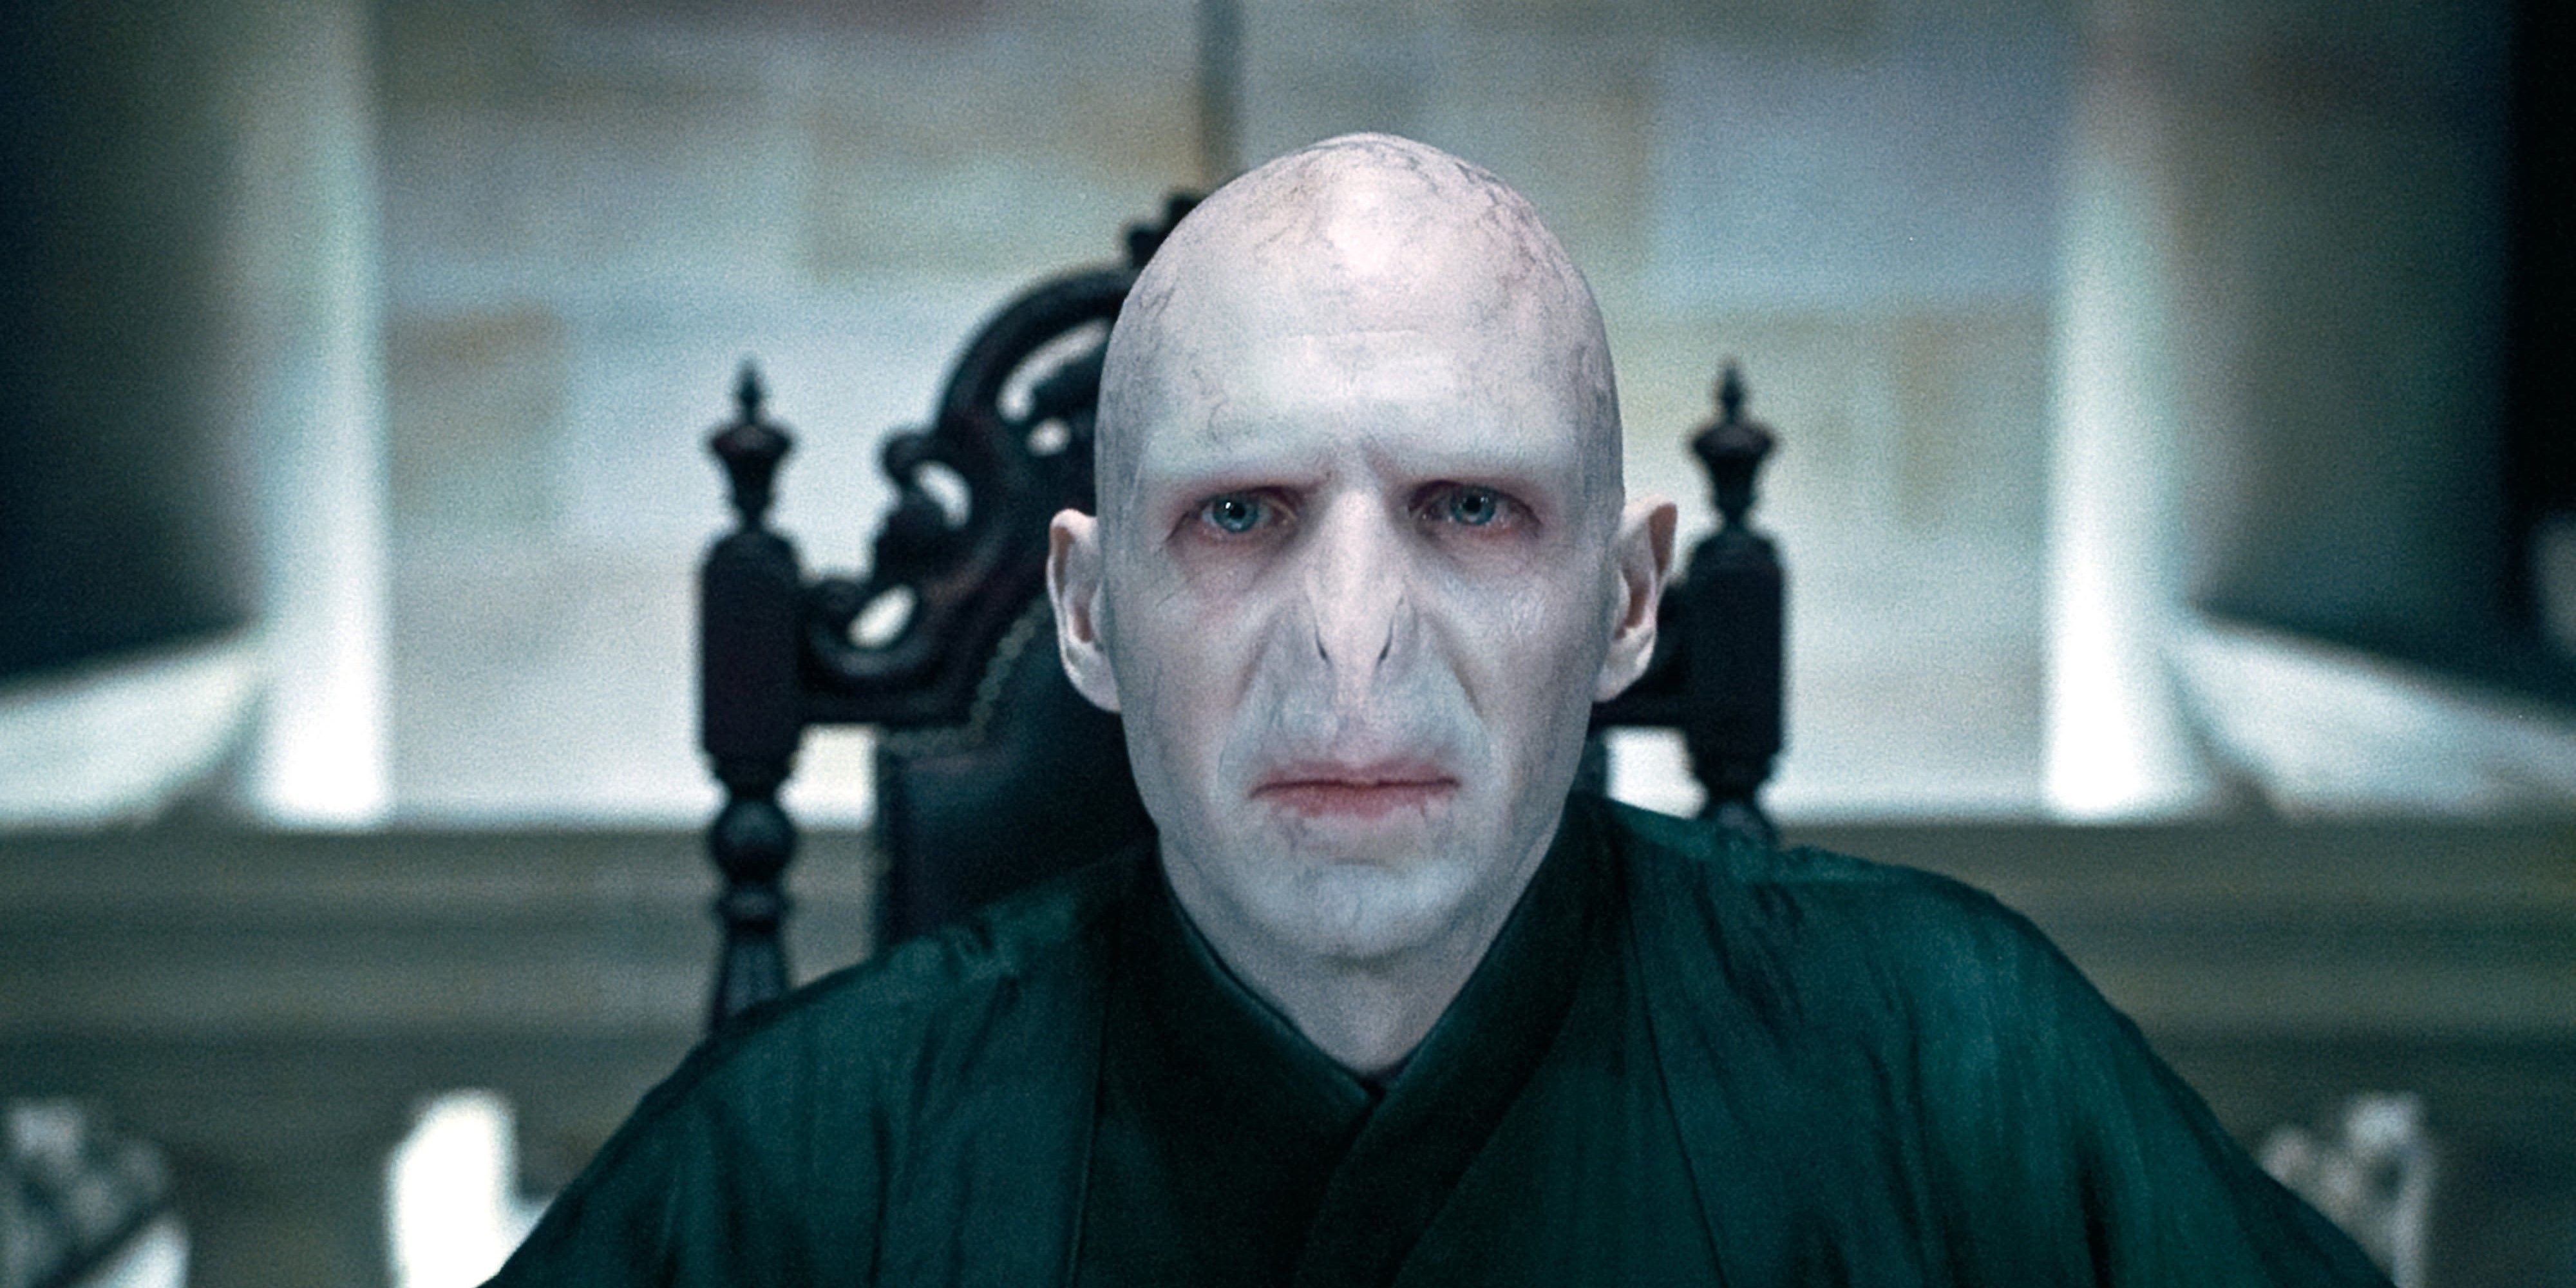 Voldemort sitting on a chair in Harry Potter and the Deadly Hallows Part 1